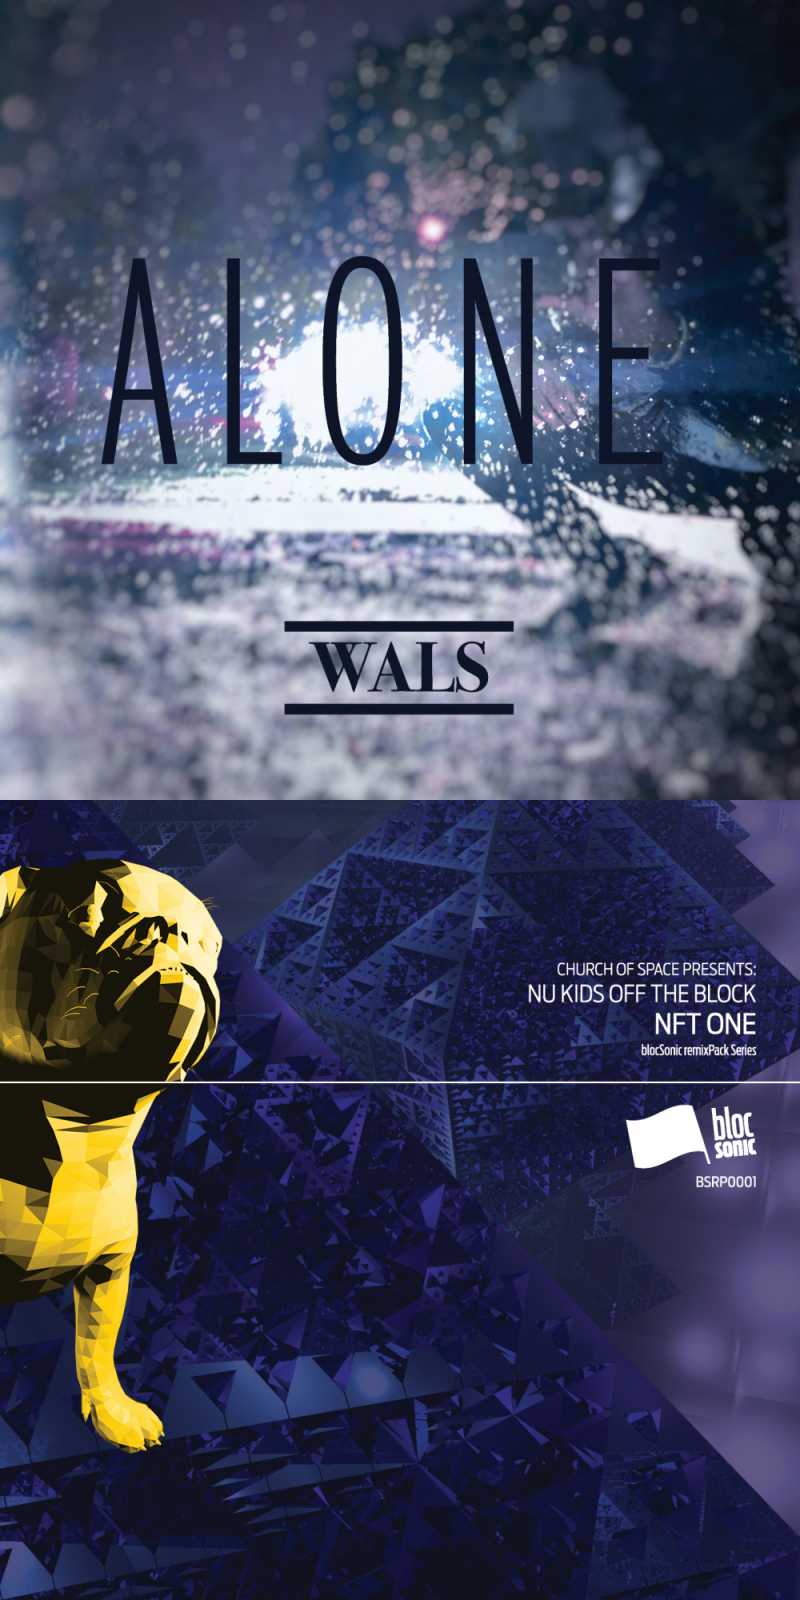 Covers of Wals “Alone” and Church of Space Presents: Nu Kids Off The Block “NFT One”